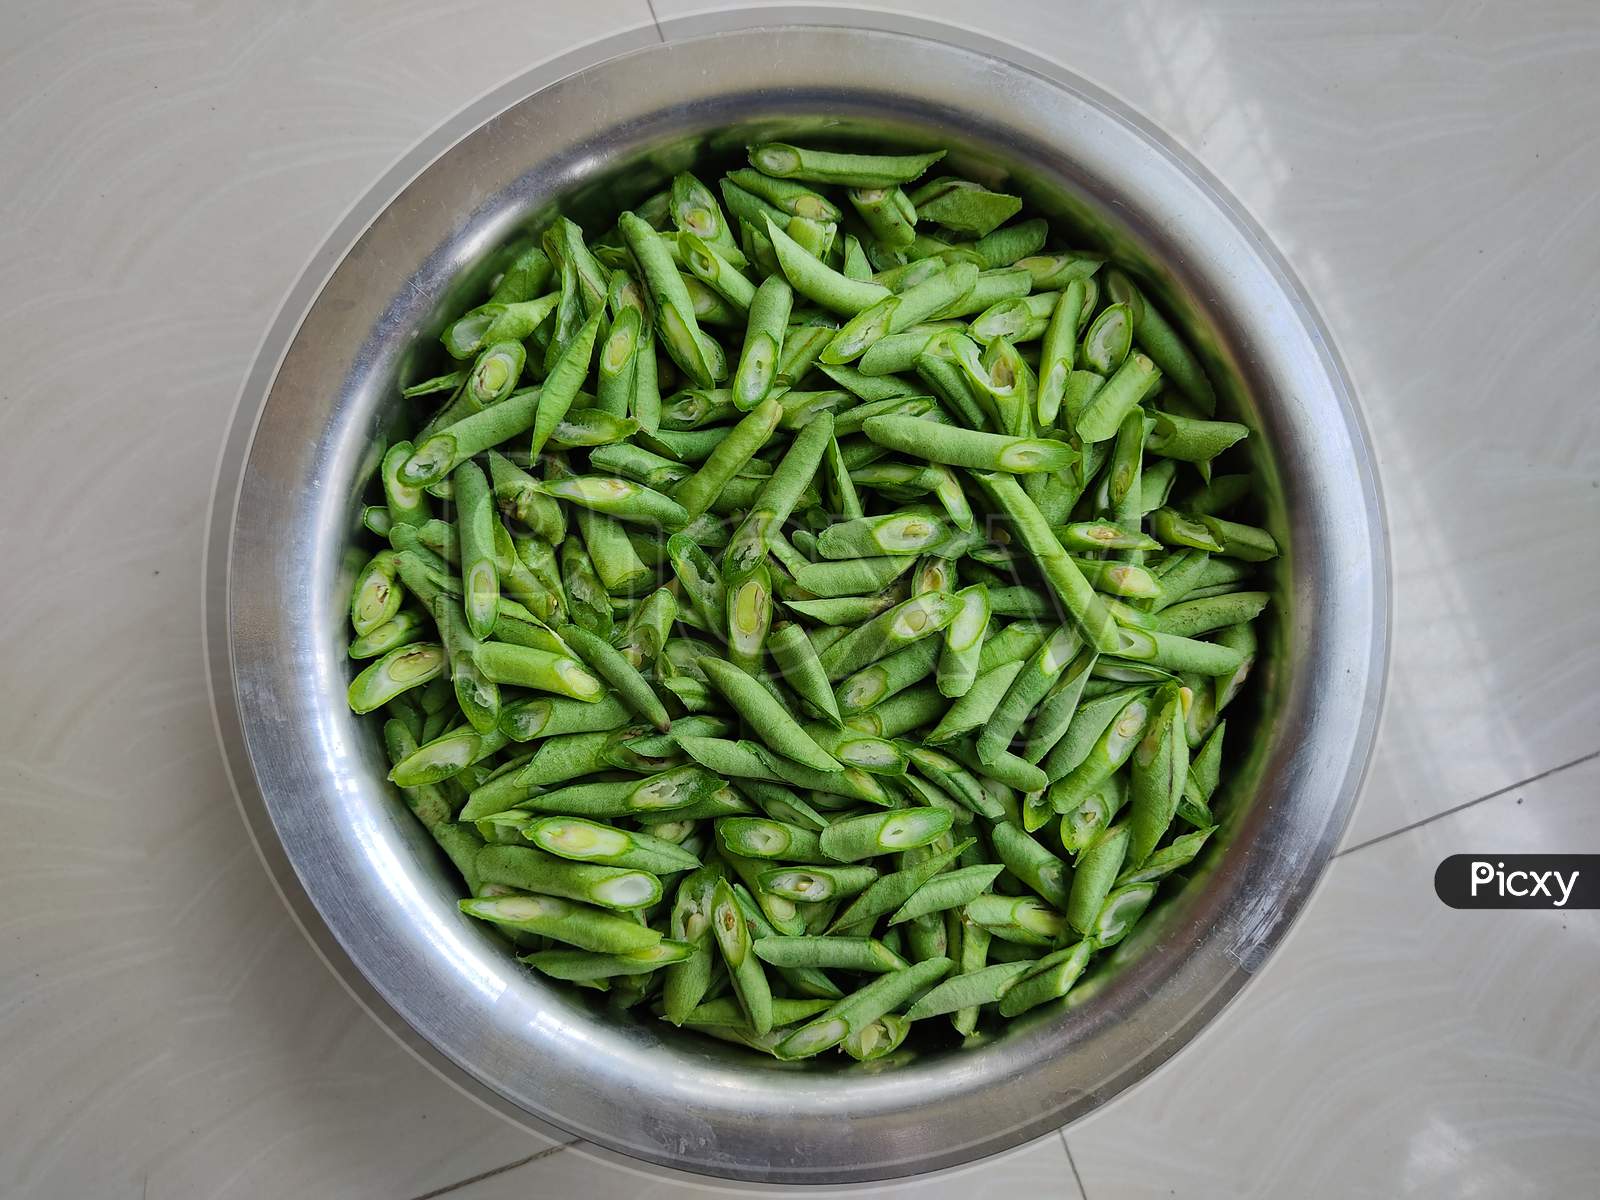 Beans kept in Steel Bowl after being cut